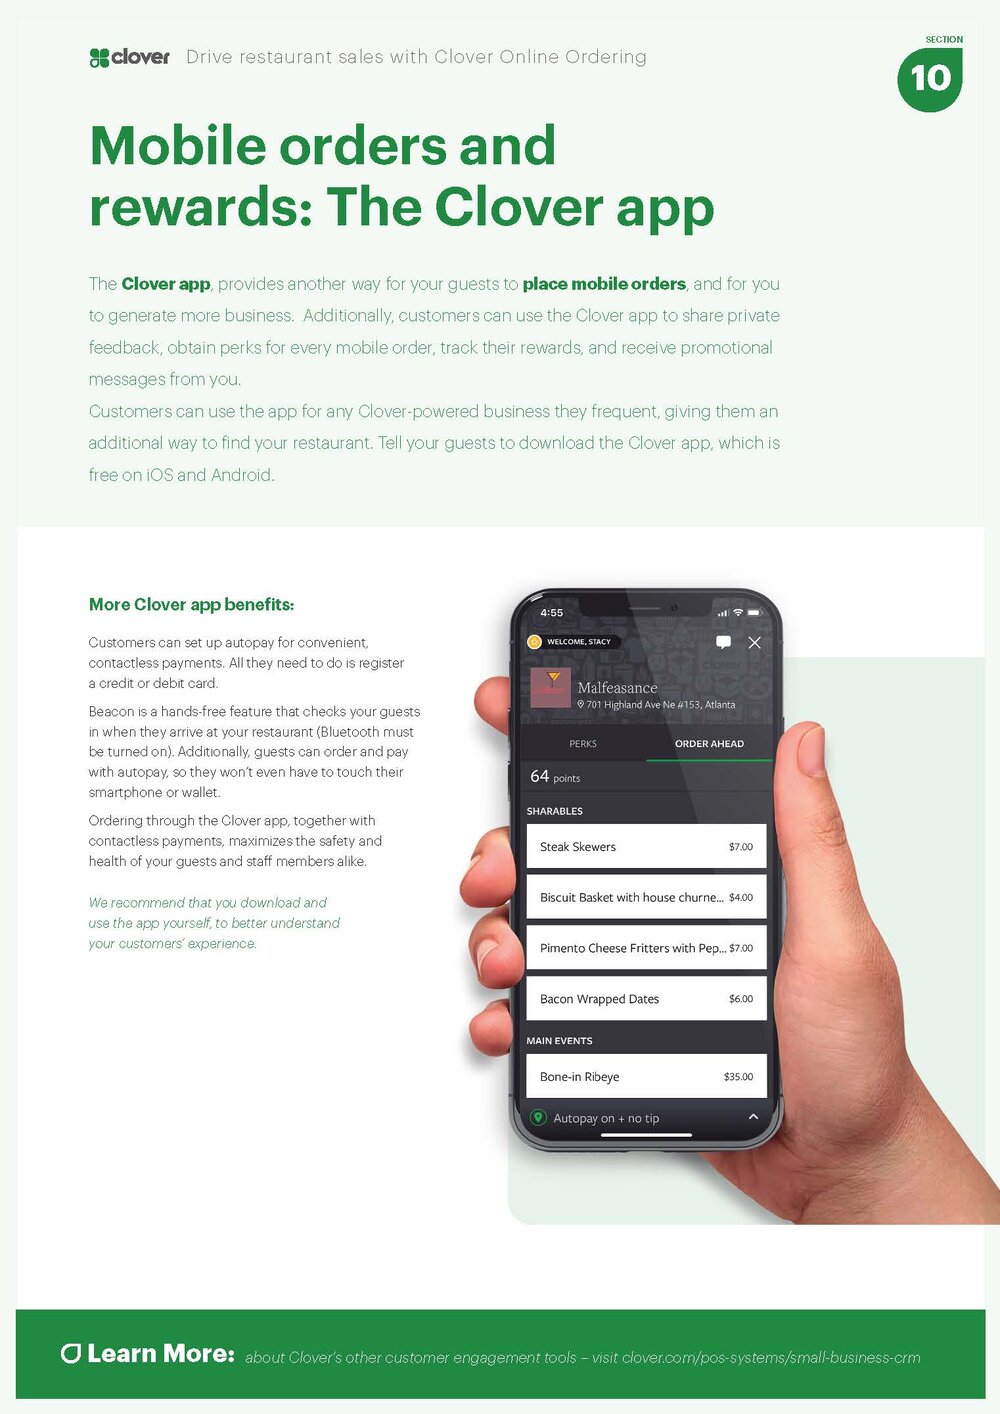 Drive Sales With Clover Online Ordering_Page_14.jpg